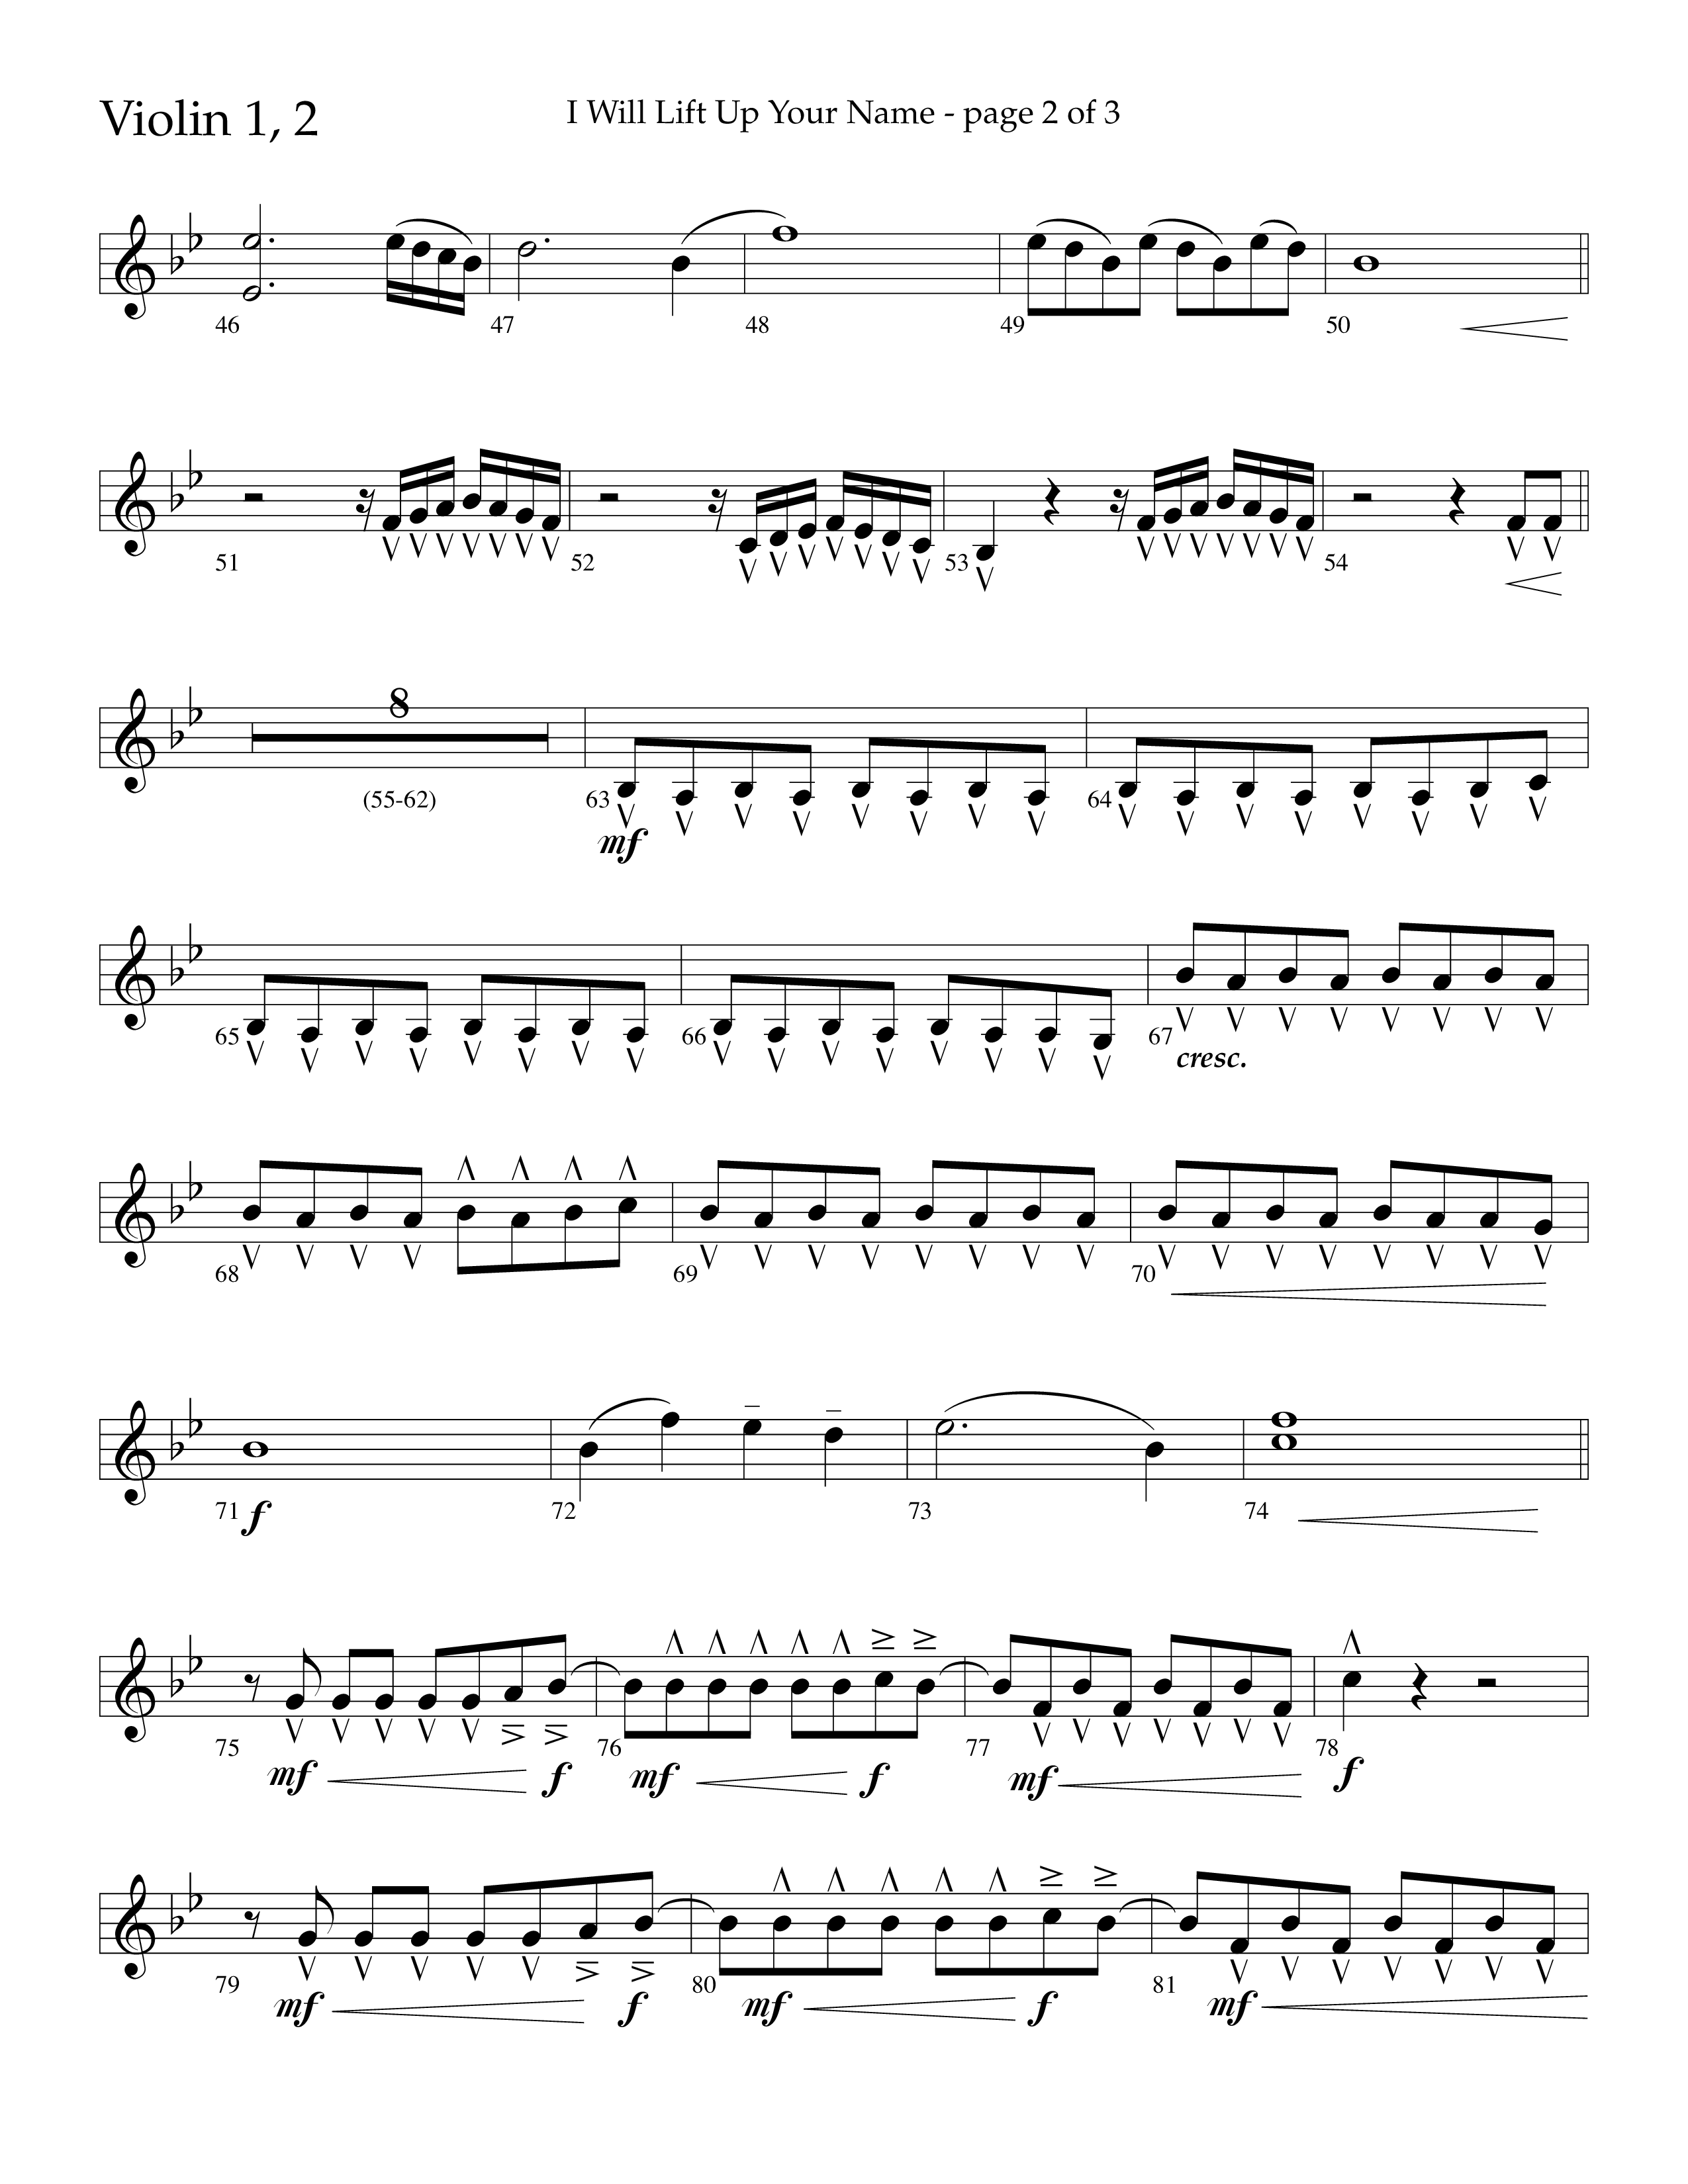 I Will Lift Up Your Name (Choral Anthem SATB) Violin 1/2 (Lifeway Choral / Arr. John Bolin / Orch. Cliff Duren)